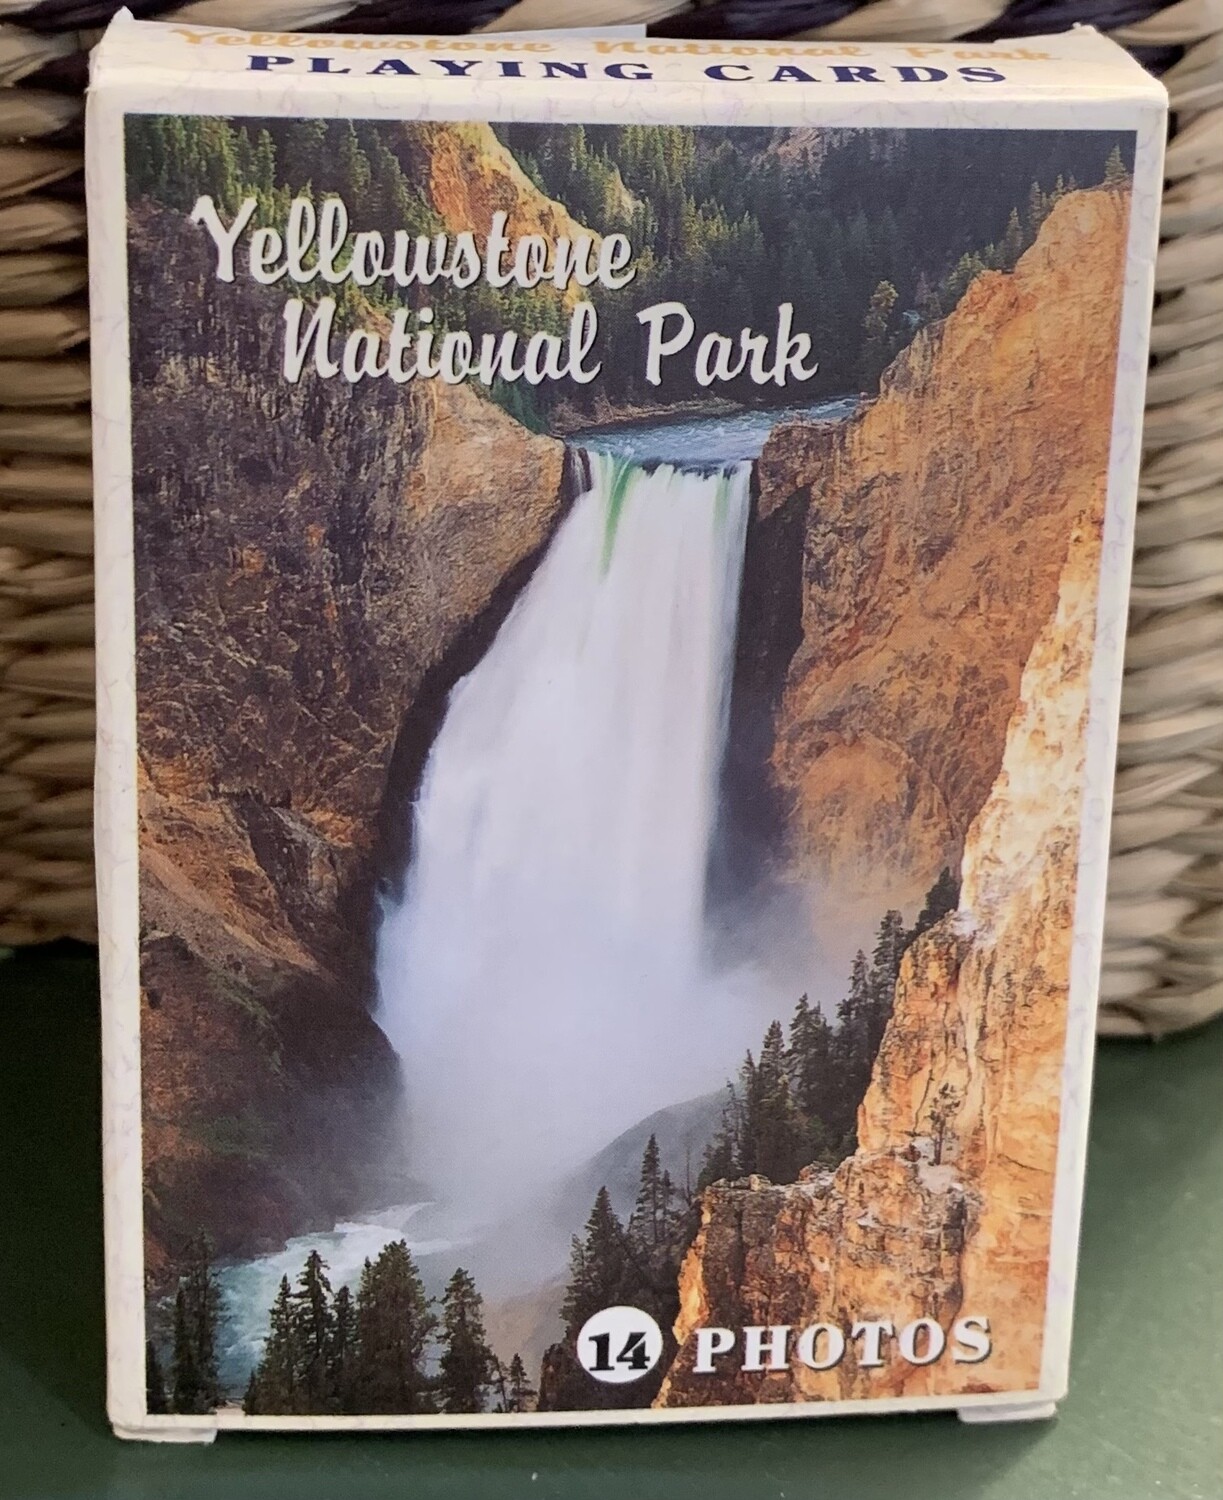 Yellowstone National Park14 photos playing cards